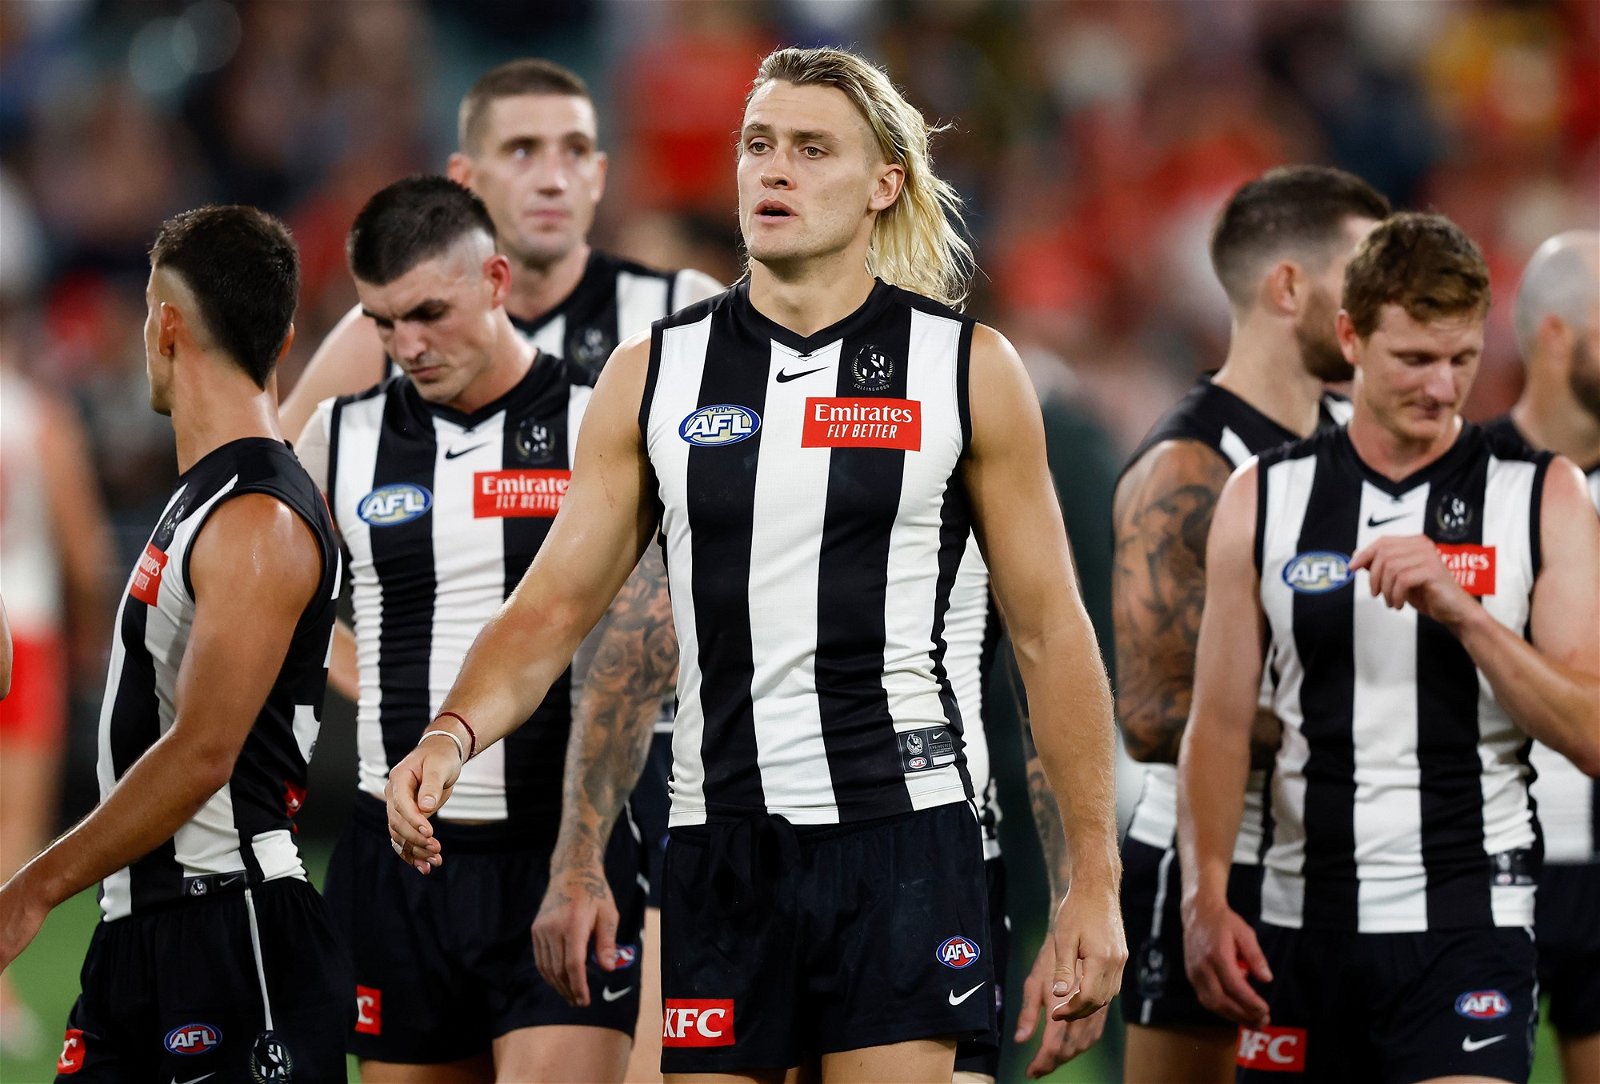 Collingwood captain Darcy Moore walks off with his team after a loss at the MCG.